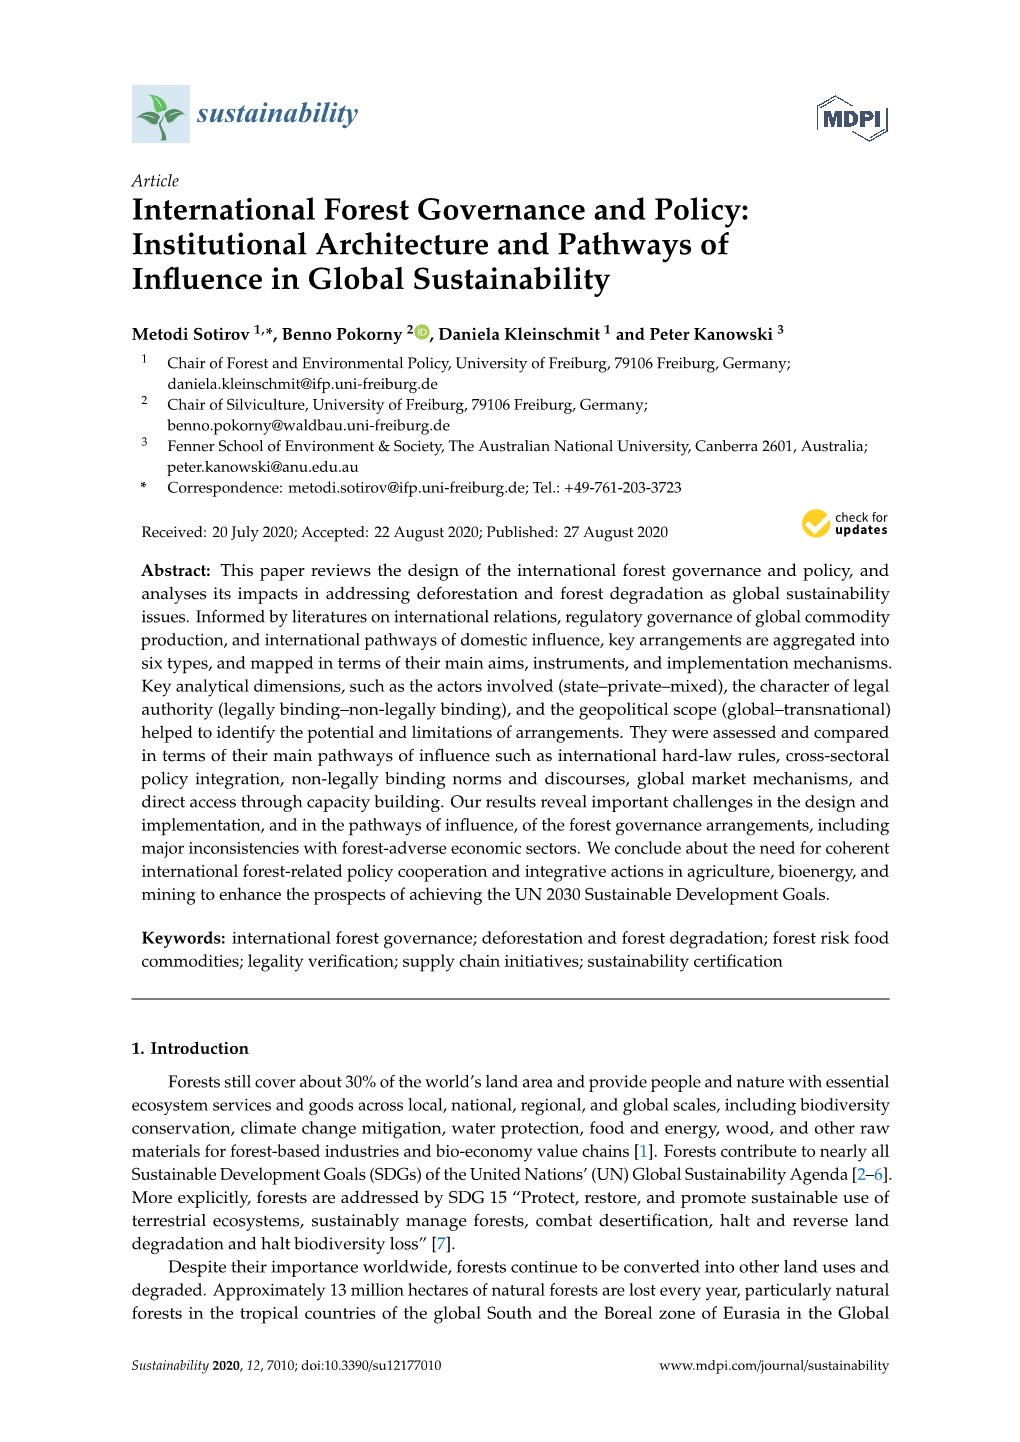 International Forest Governance and Policy: Institutional Architecture and Pathways of Inﬂuence in Global Sustainability